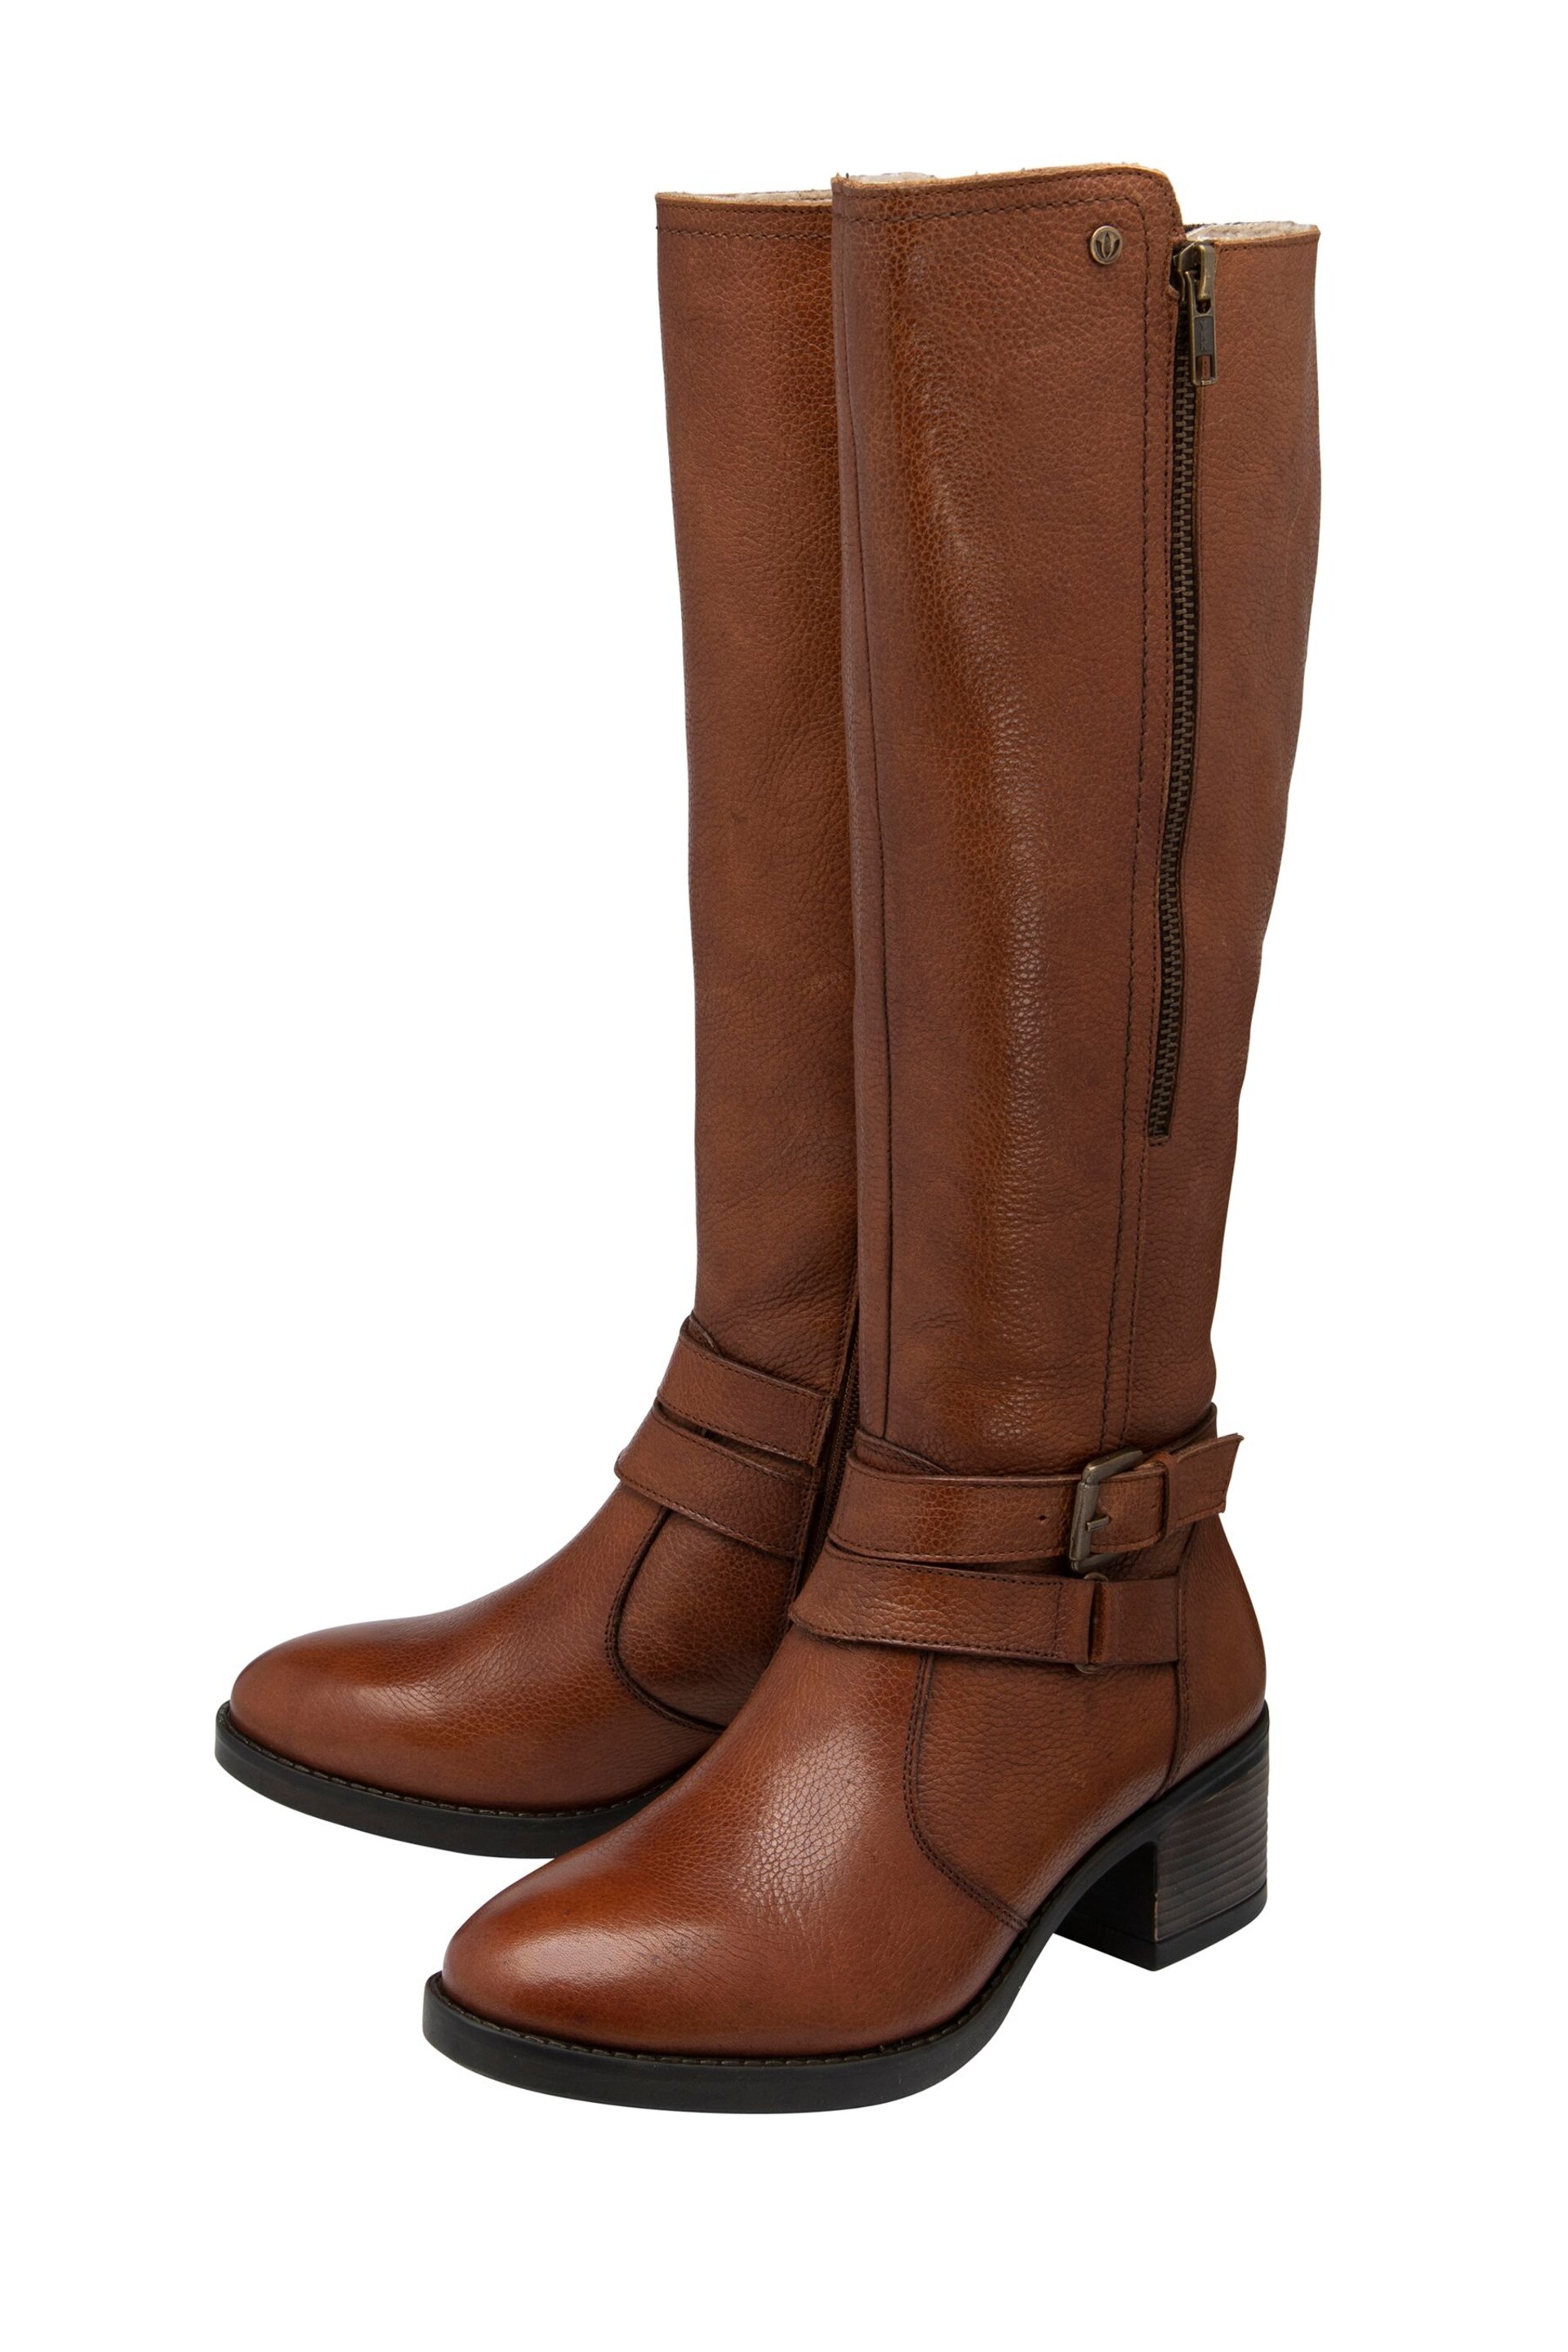 Lotus Brown Leather Knee High Boots - Image 2 of 4